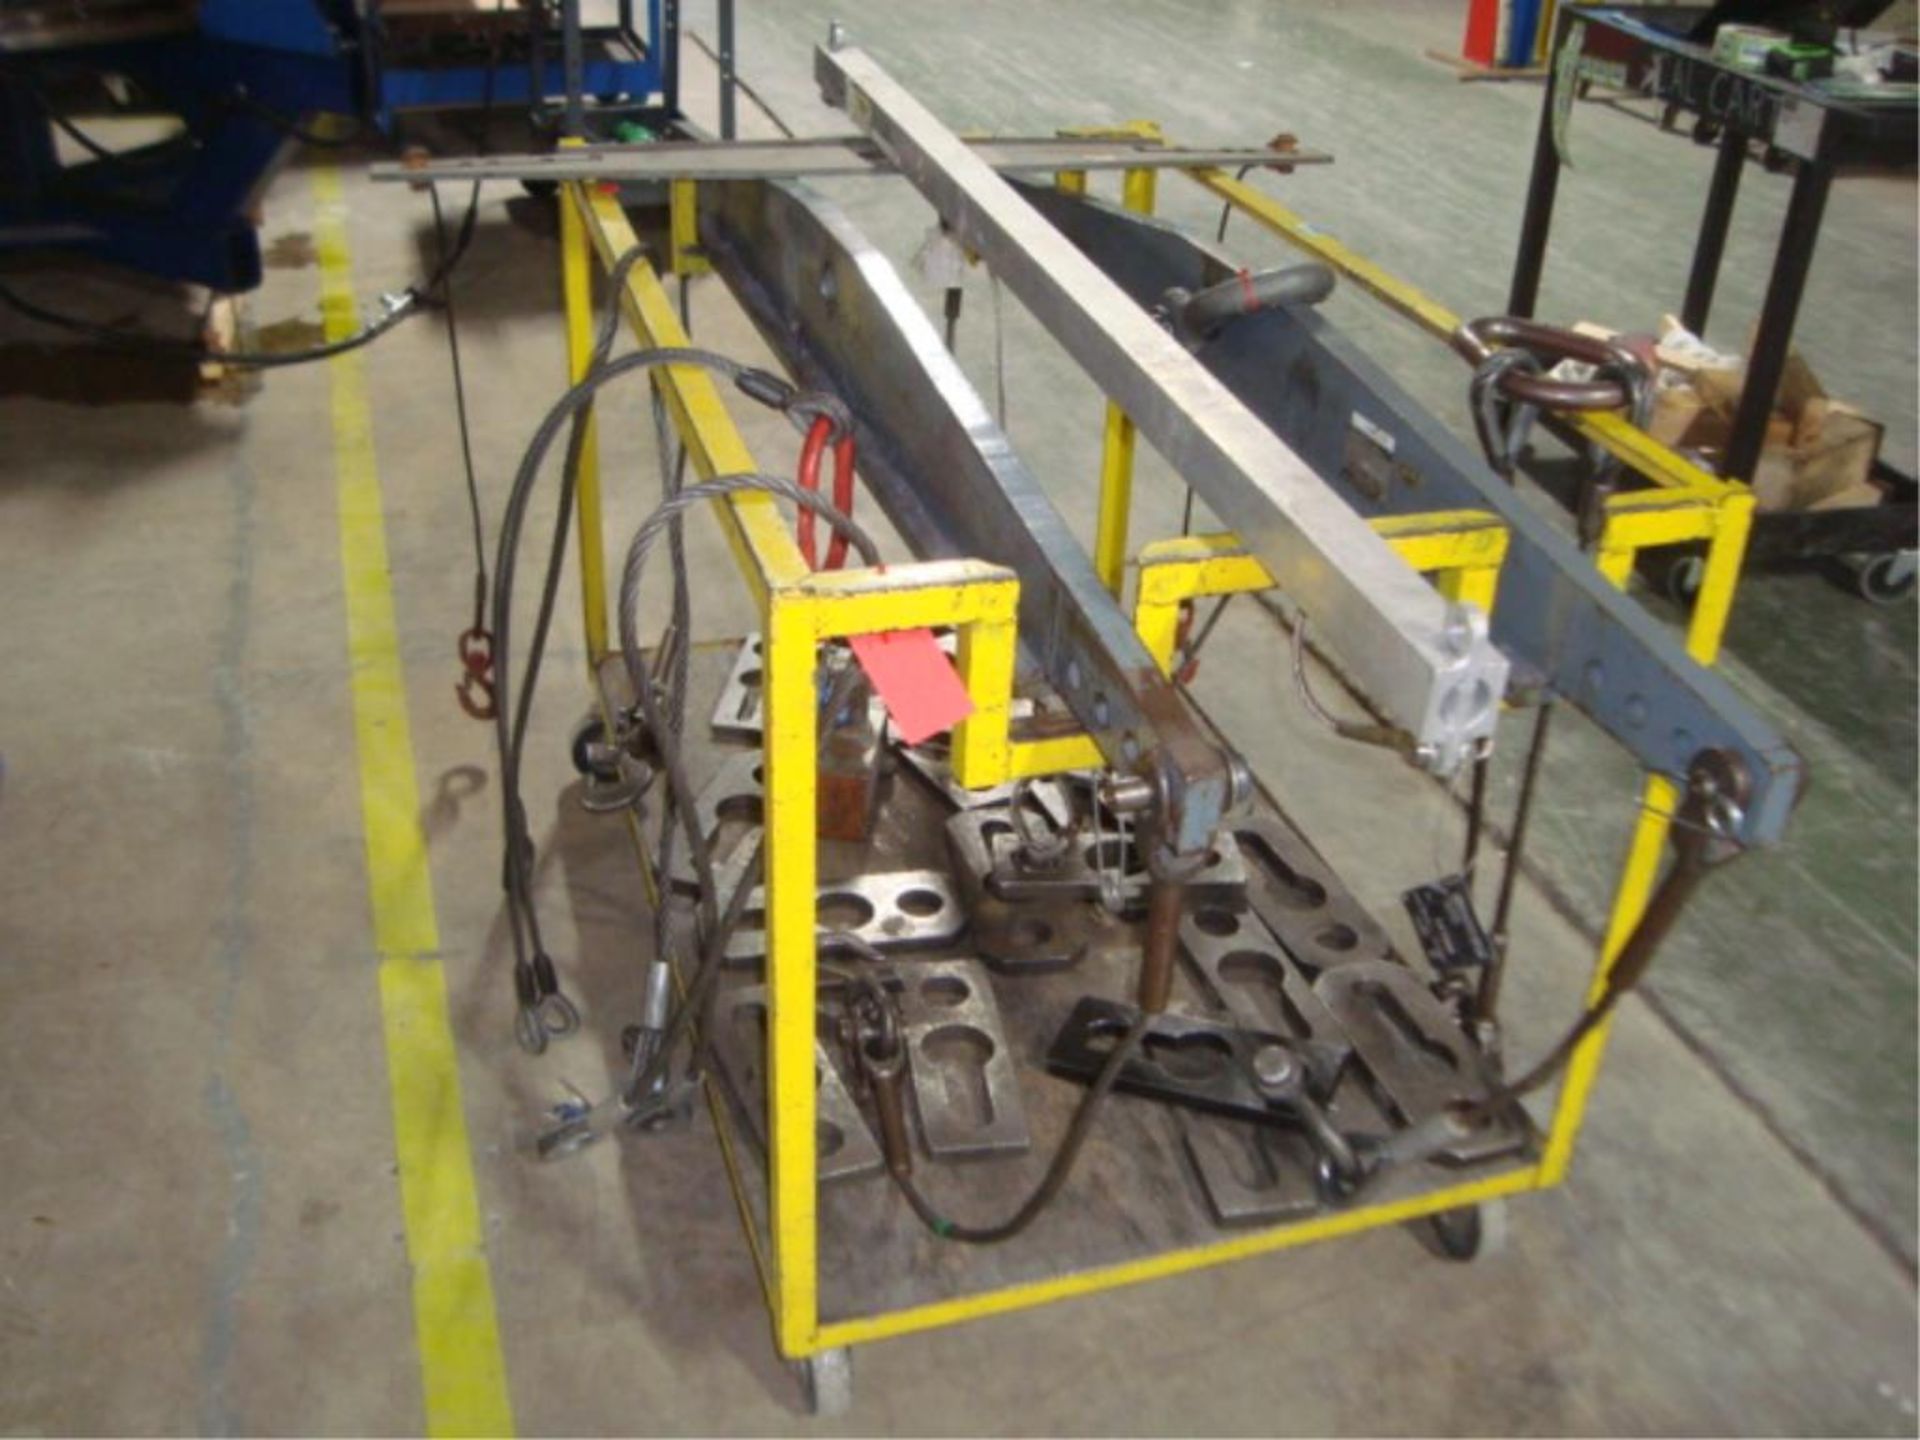 Tool Lift Bars & Mobile Cart With Fixtures - Image 2 of 7